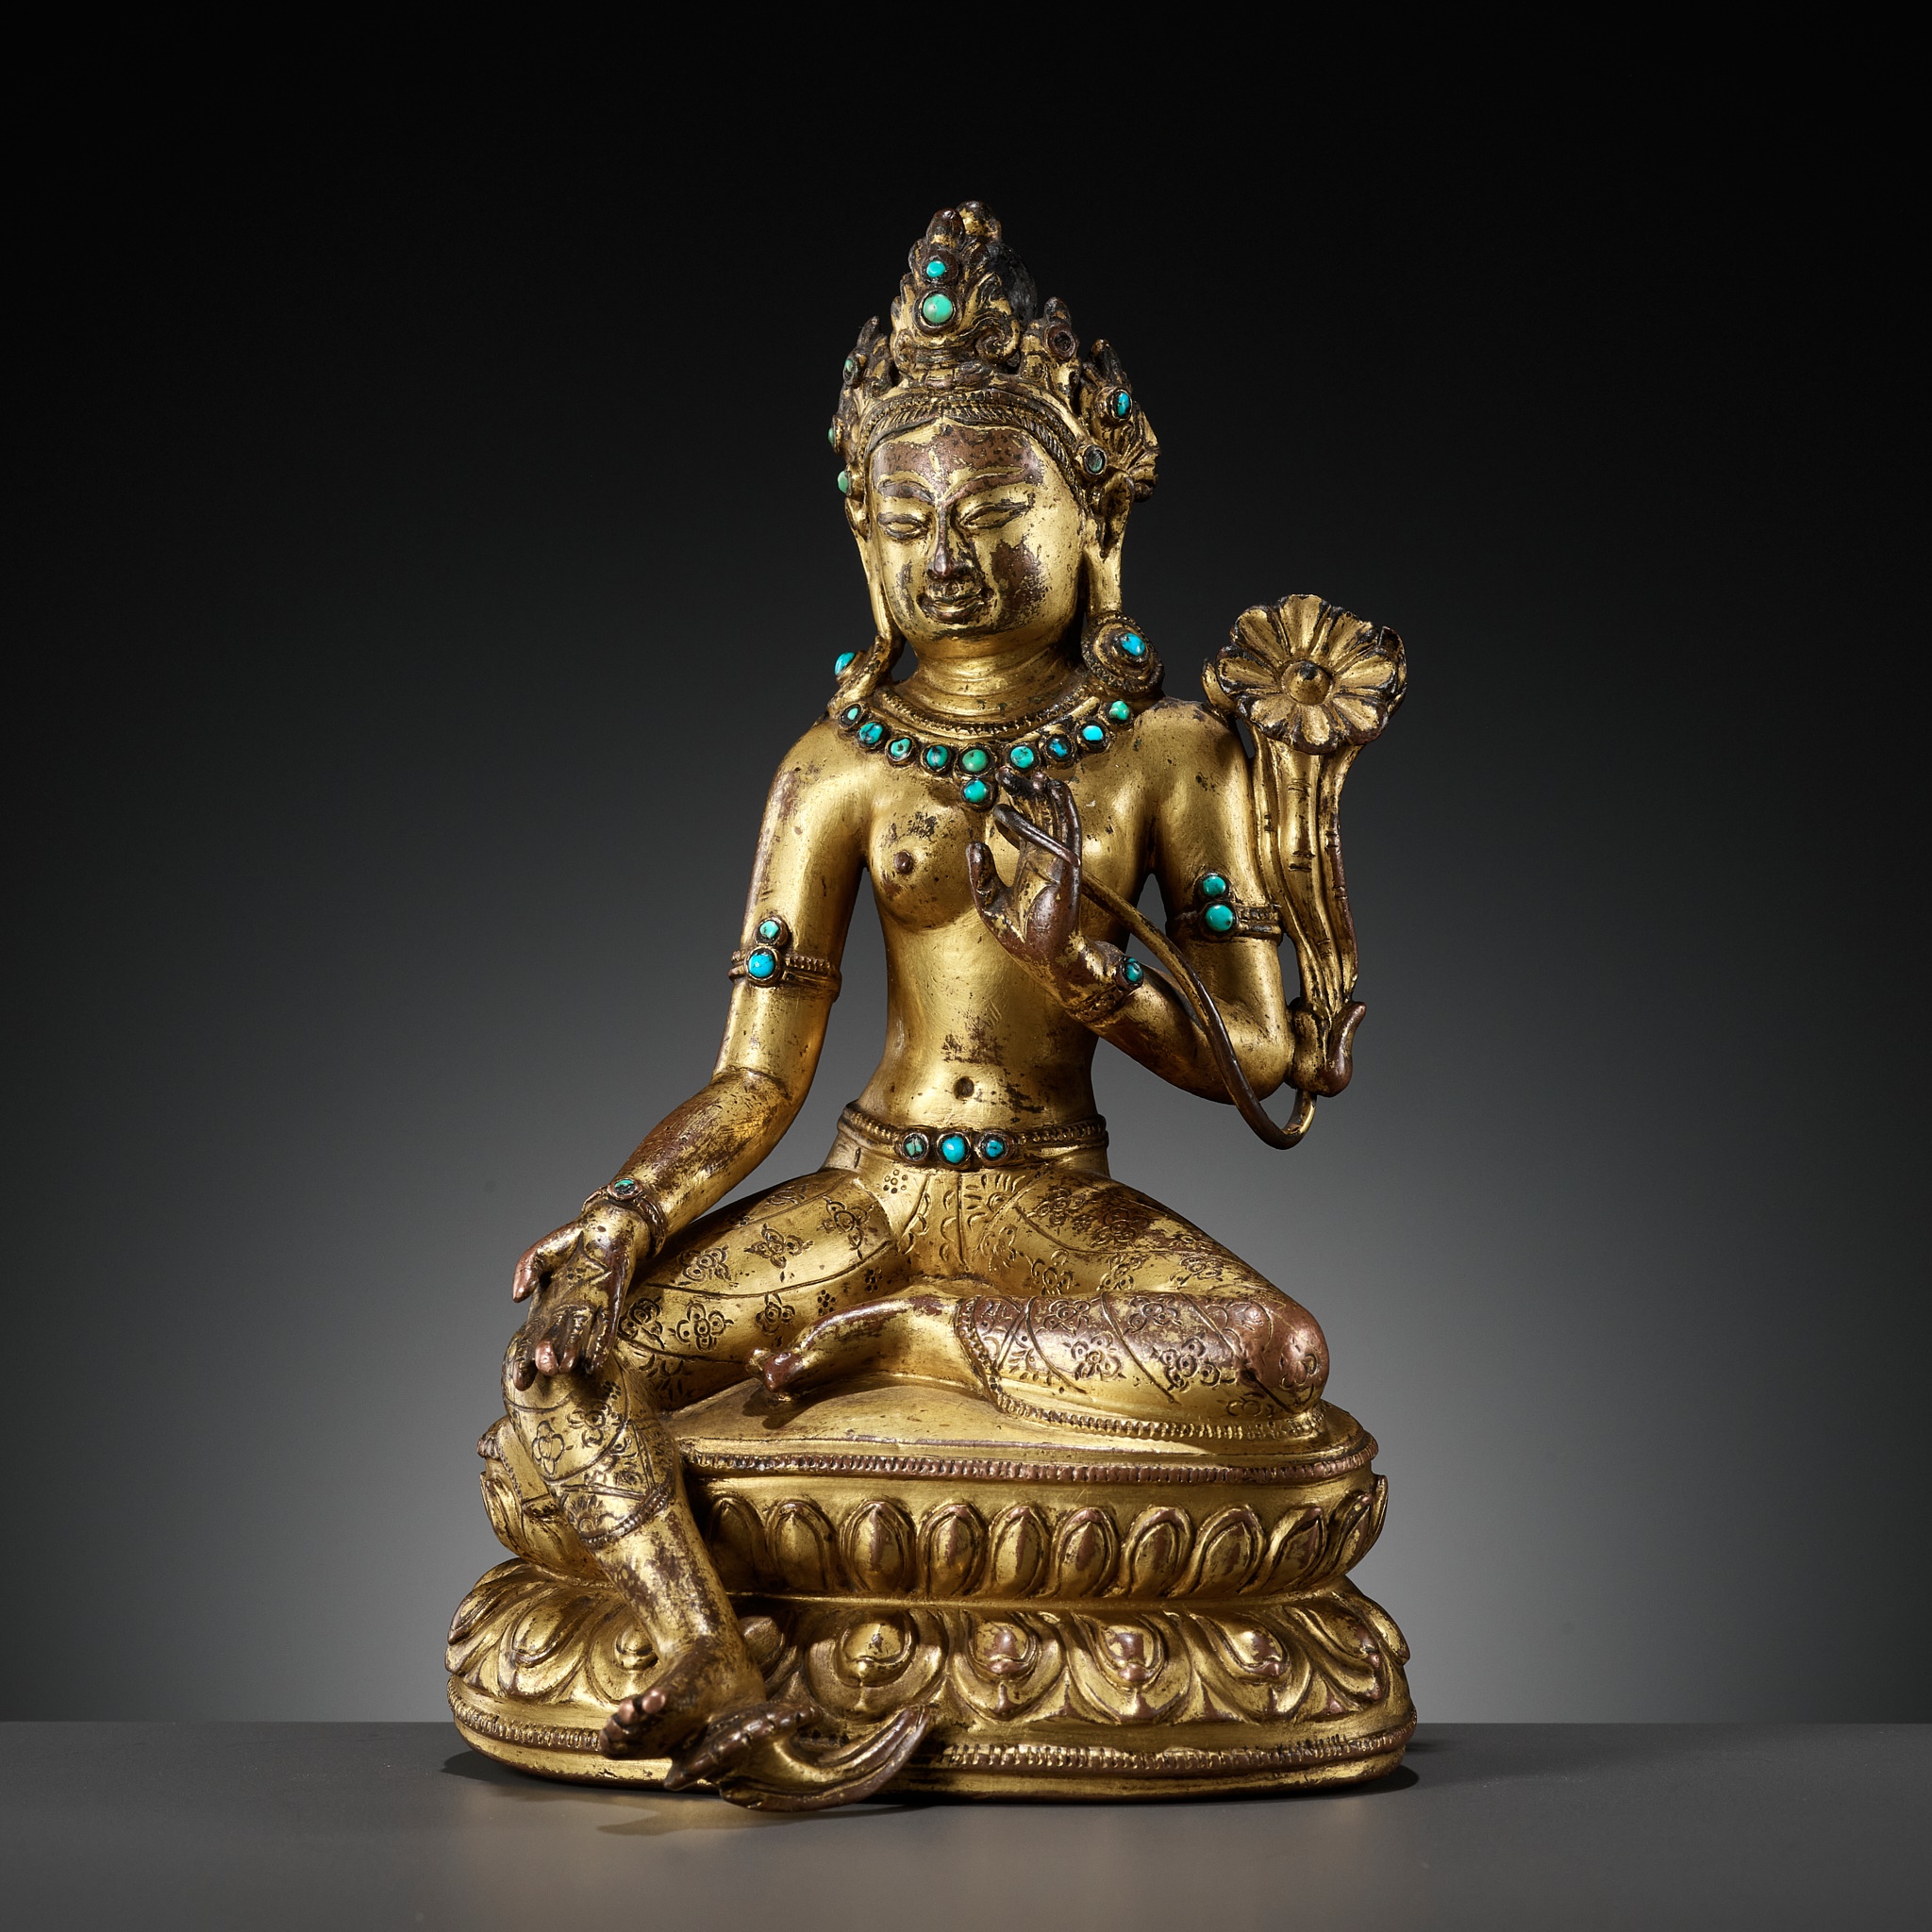 A GILT AND TURQUOISE-INLAID COPPER ALLOY FIGURE OF GREEN TARA, DENSATIL STYLE, TIBET, 14TH CENTURY - Image 16 of 16